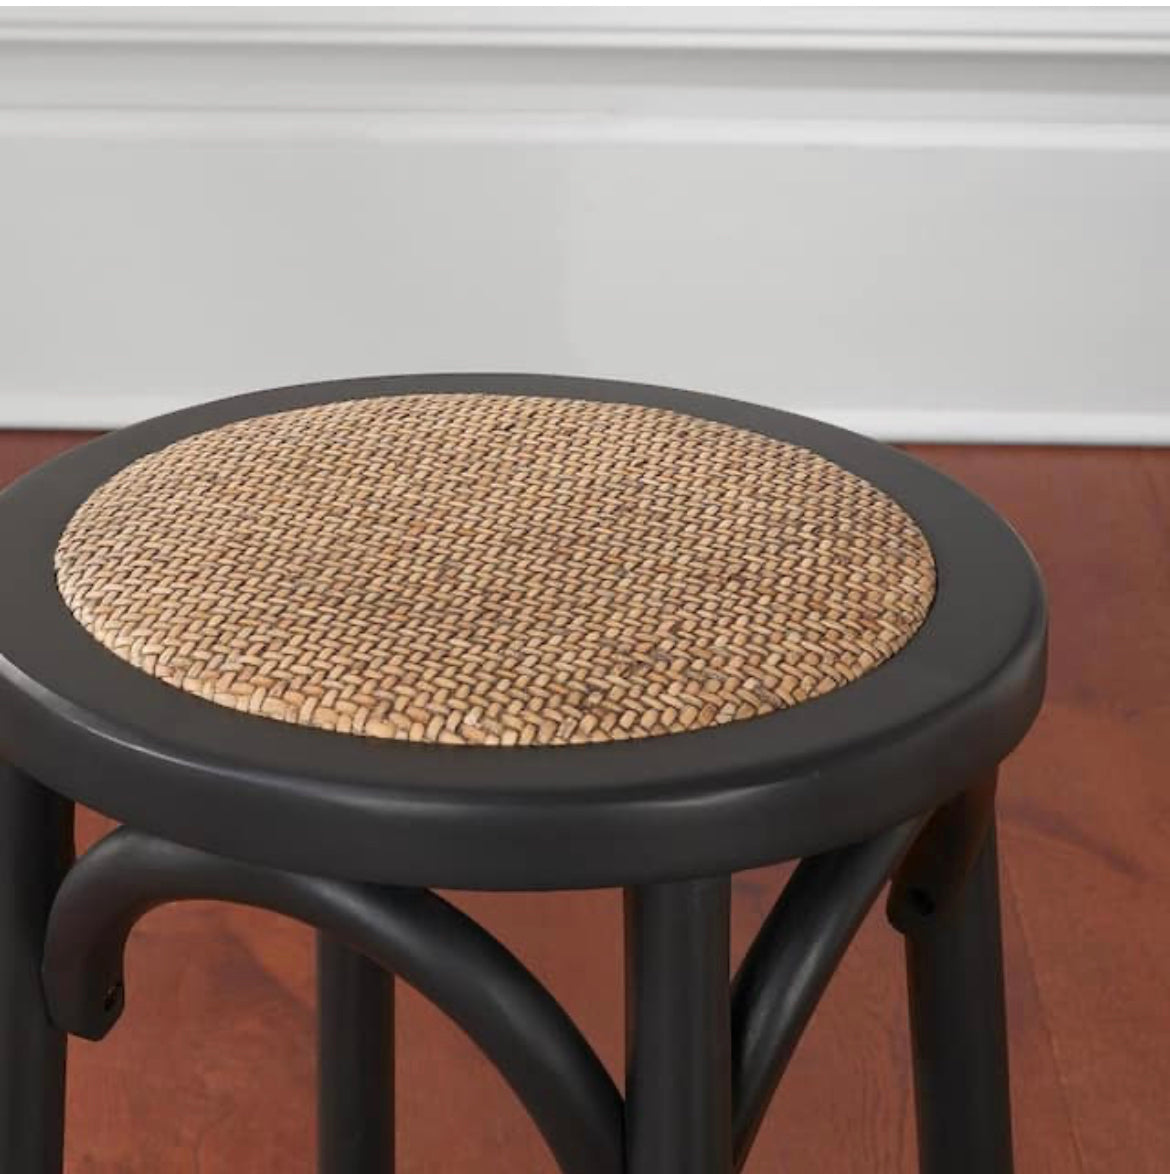 Home Decorators Collection Mavery Black Wood Backless Counter Stool with Woven Rattan Seat